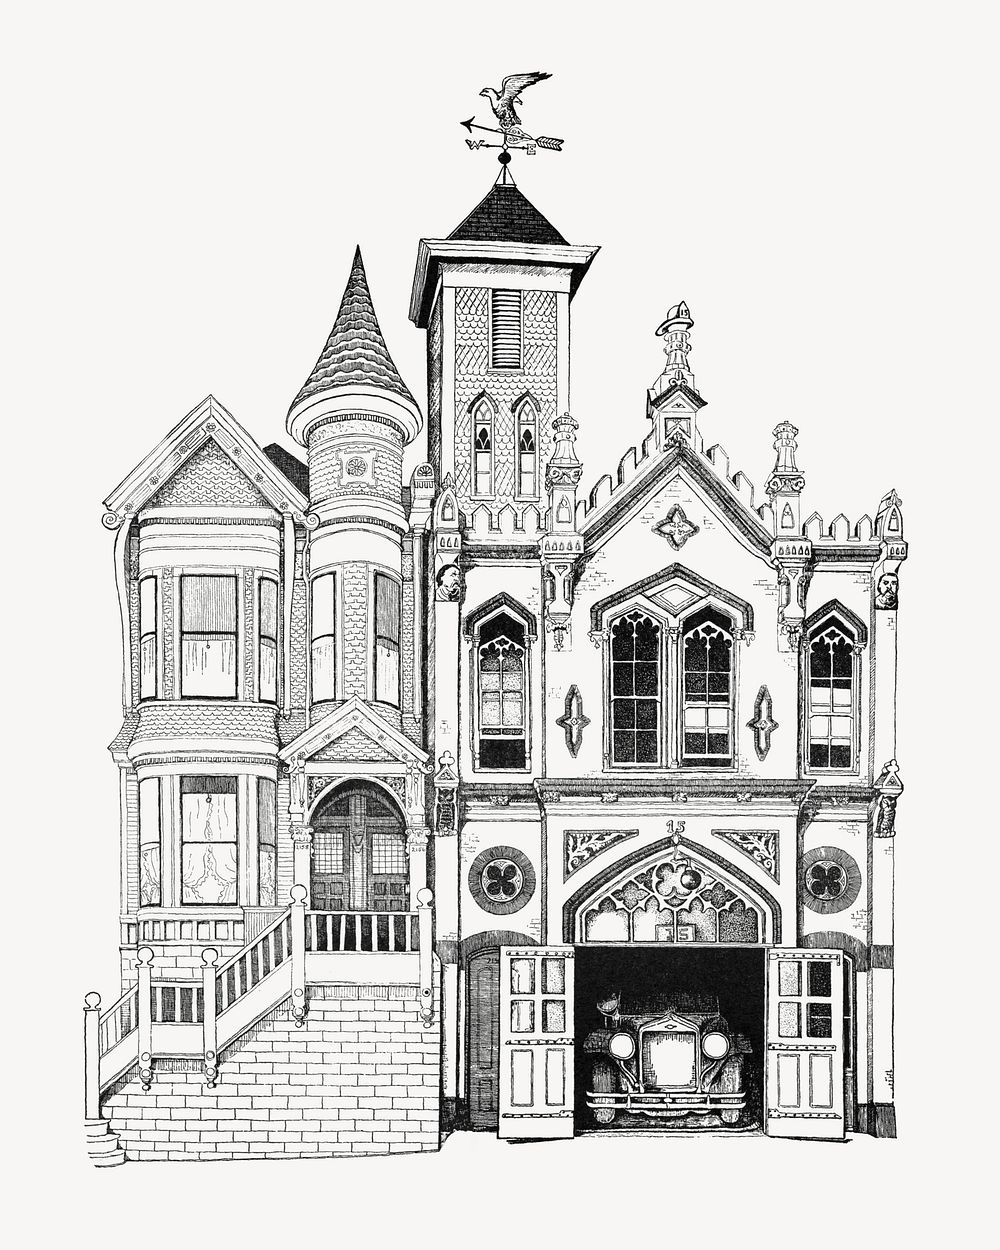 California street firehouse, vintage building illustration. Remixed by rawpixel.